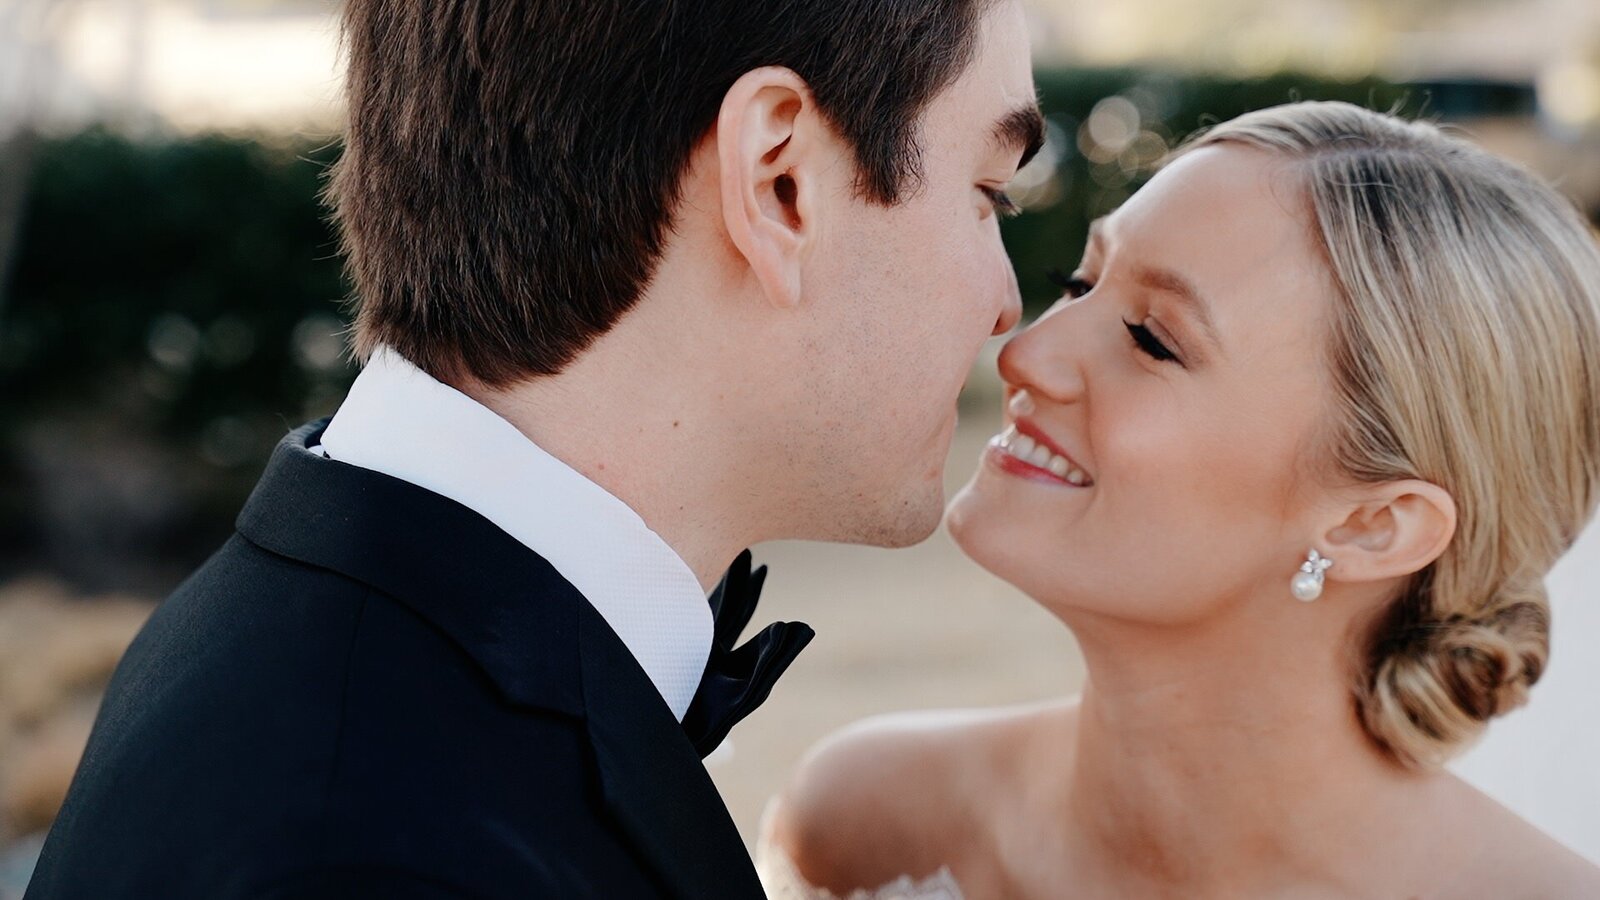 A Texas wedding videographer captures a sweet moment of a bride and groom sharing a kiss on the cheek.